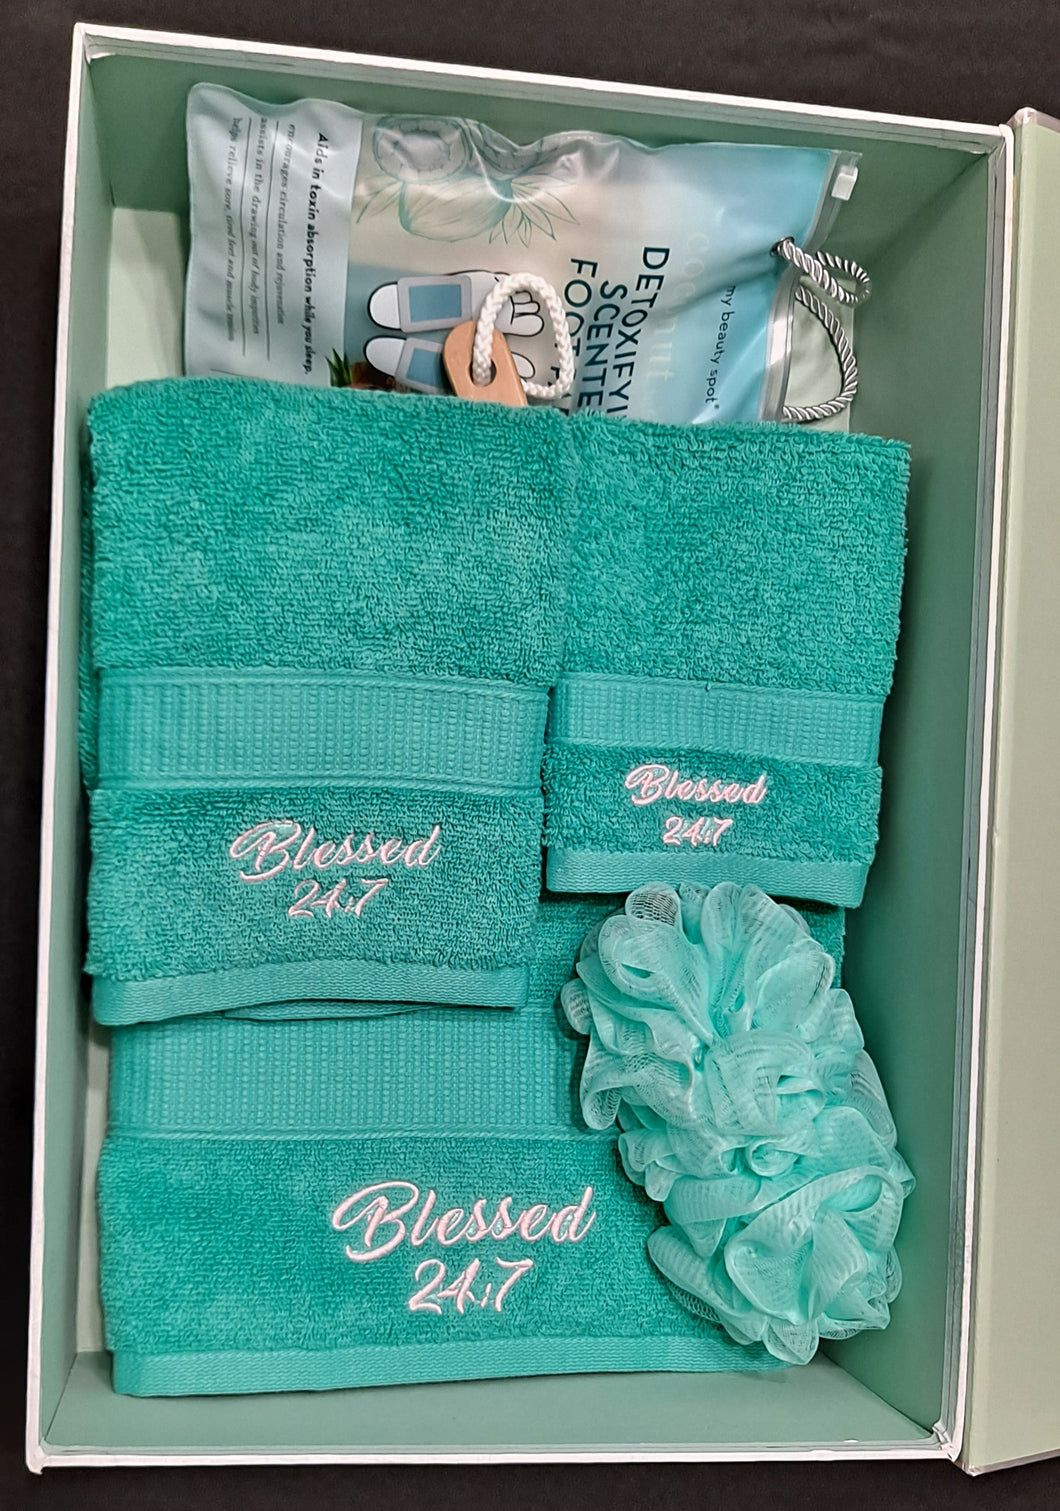 GIFT BOX SET Blessed 24:7 Pamper Day Teal Towel Gift Set with Detoxifying Foot Pads